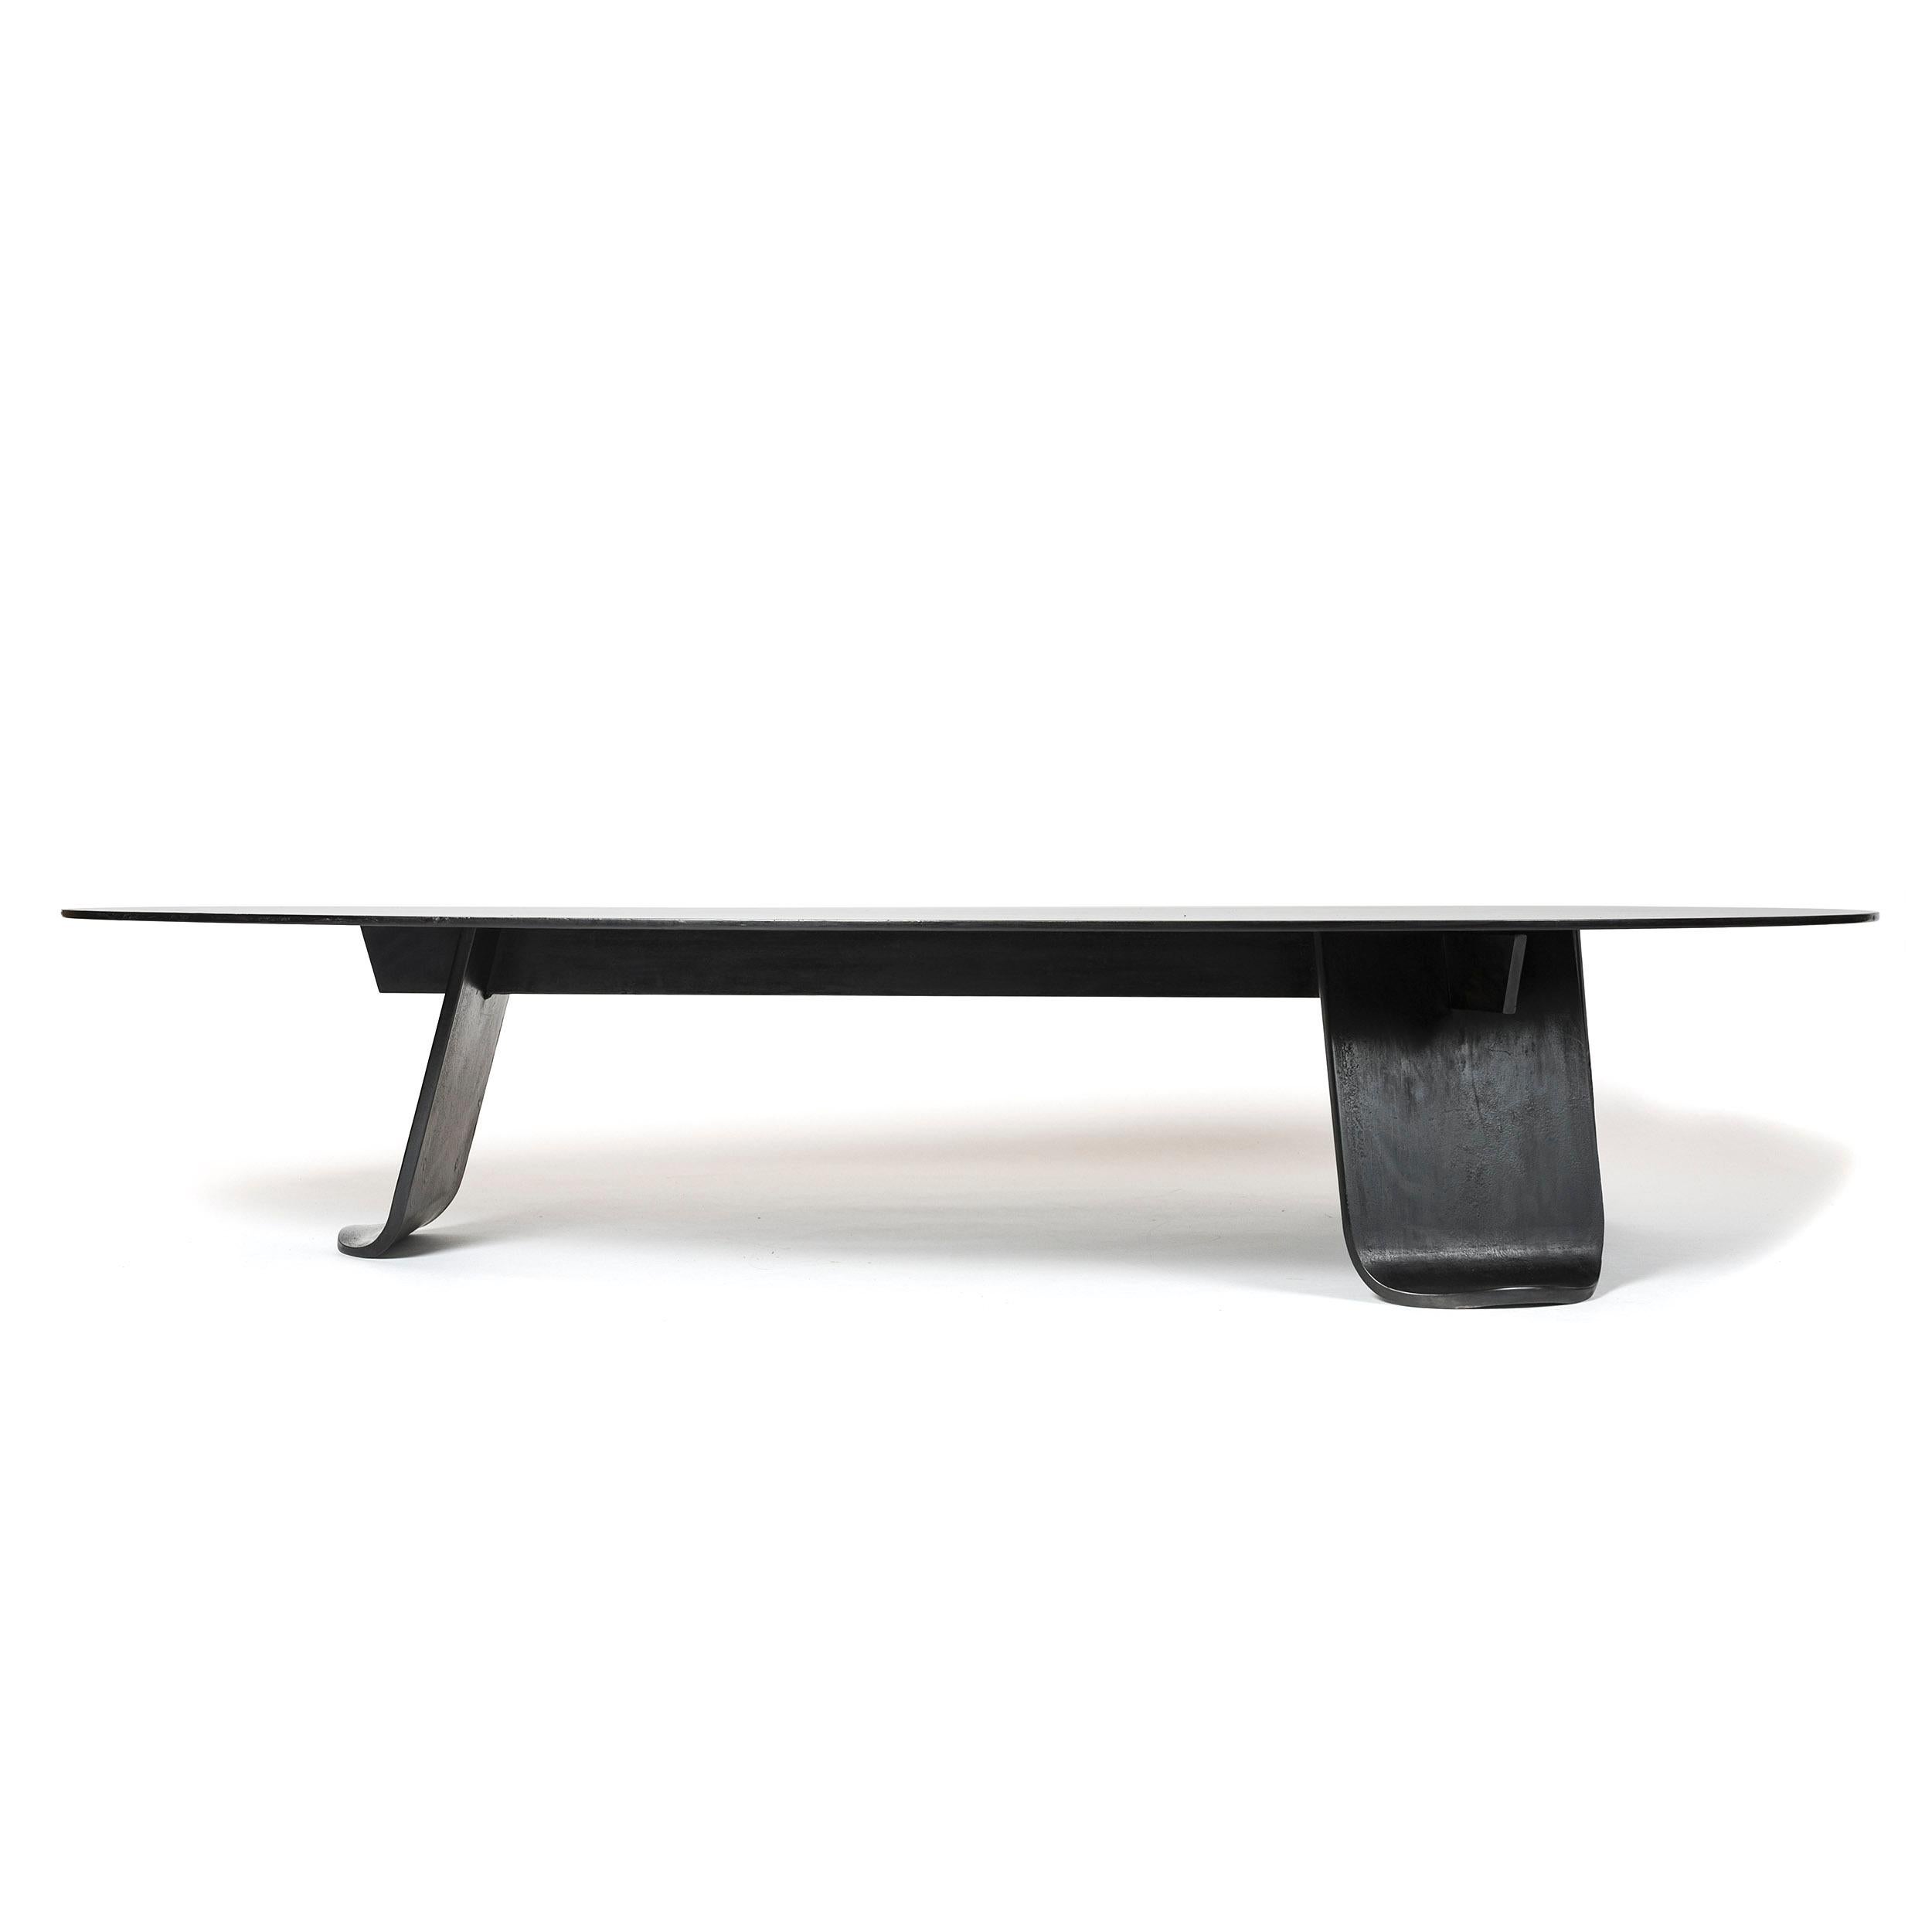 American WYETH Chrysalis Table No. 1 in Patinated Steel with Hot Zinc Finish For Sale